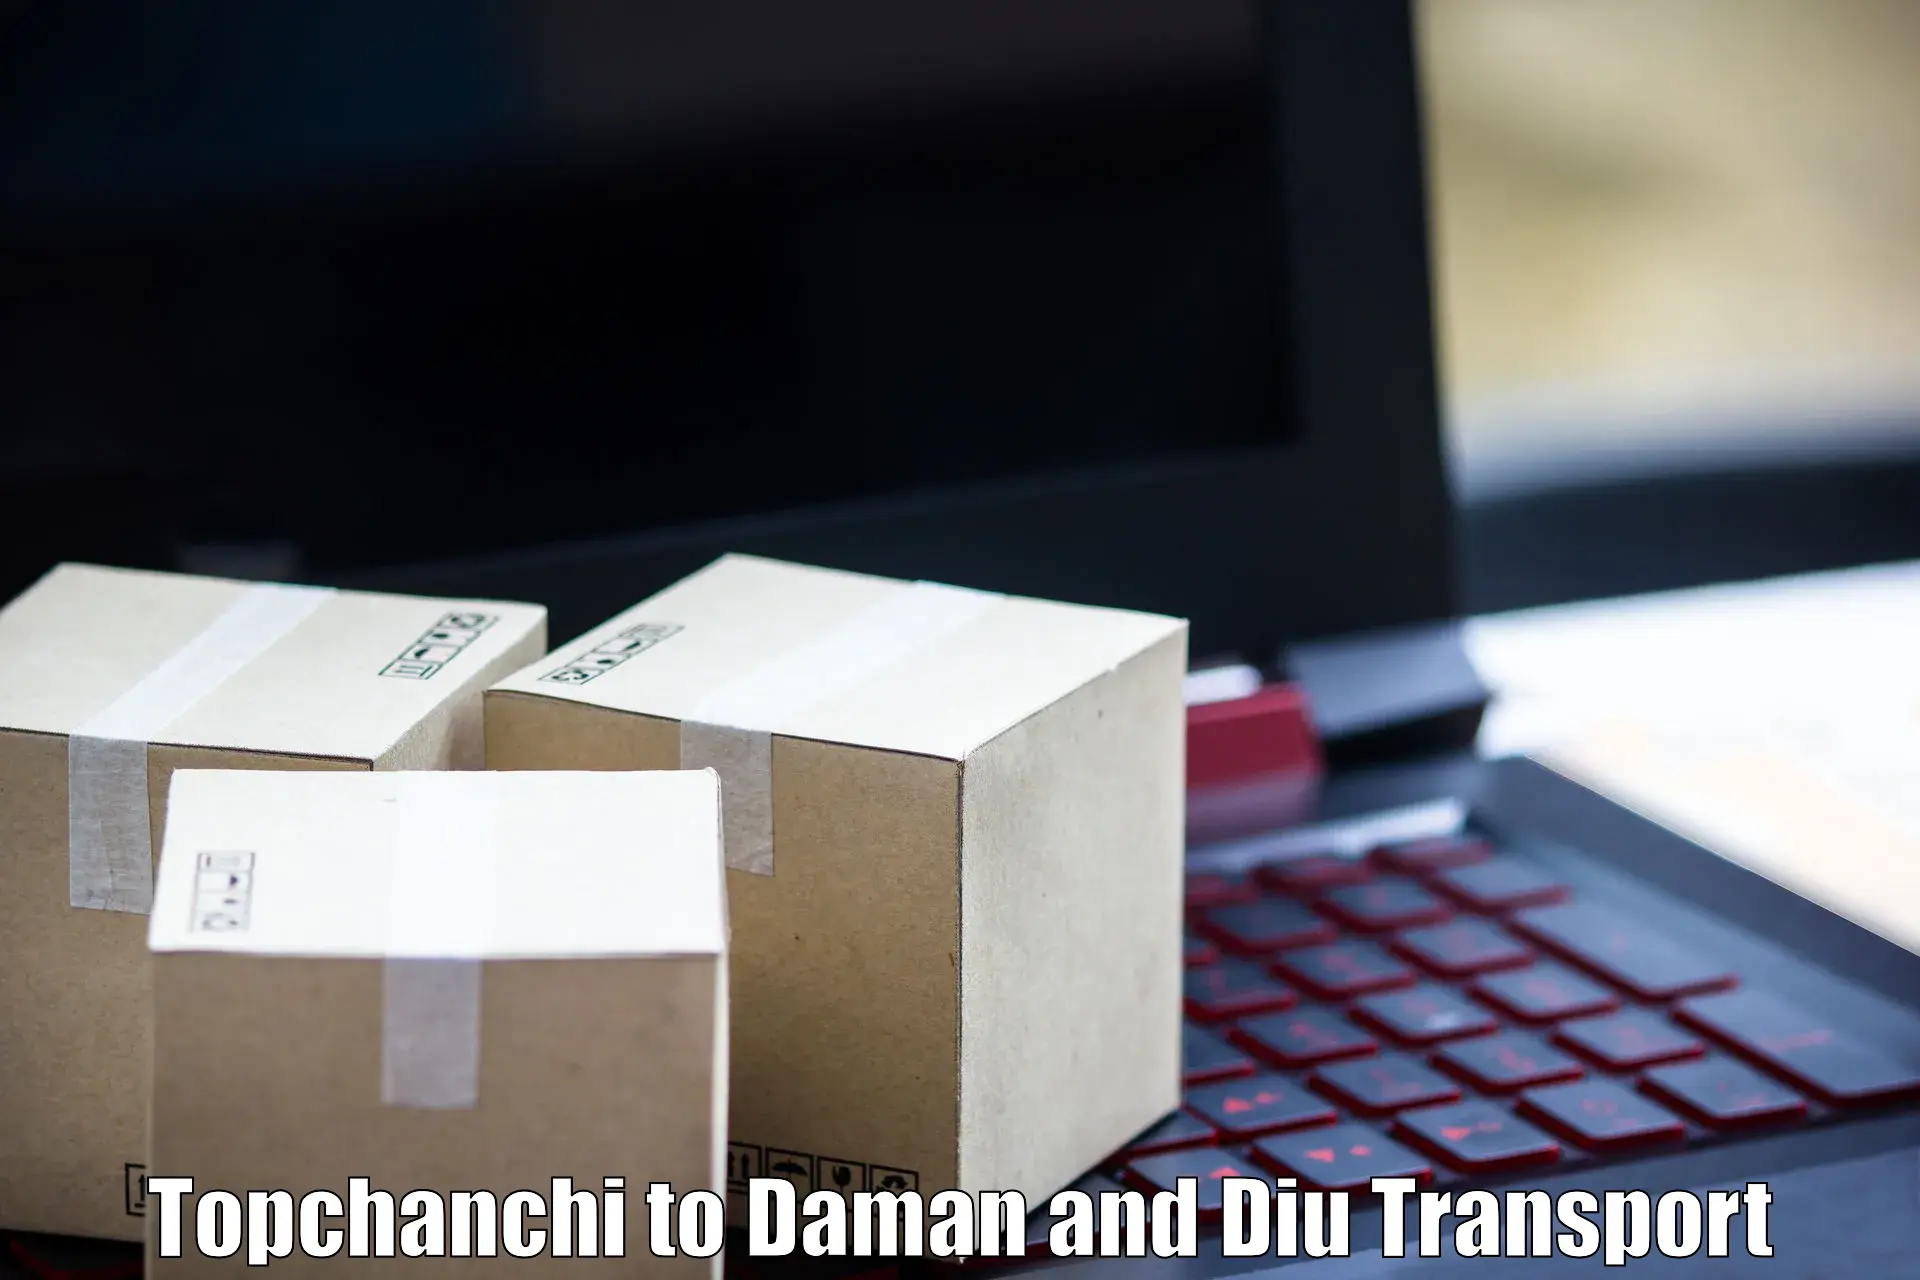 Commercial transport service Topchanchi to Diu